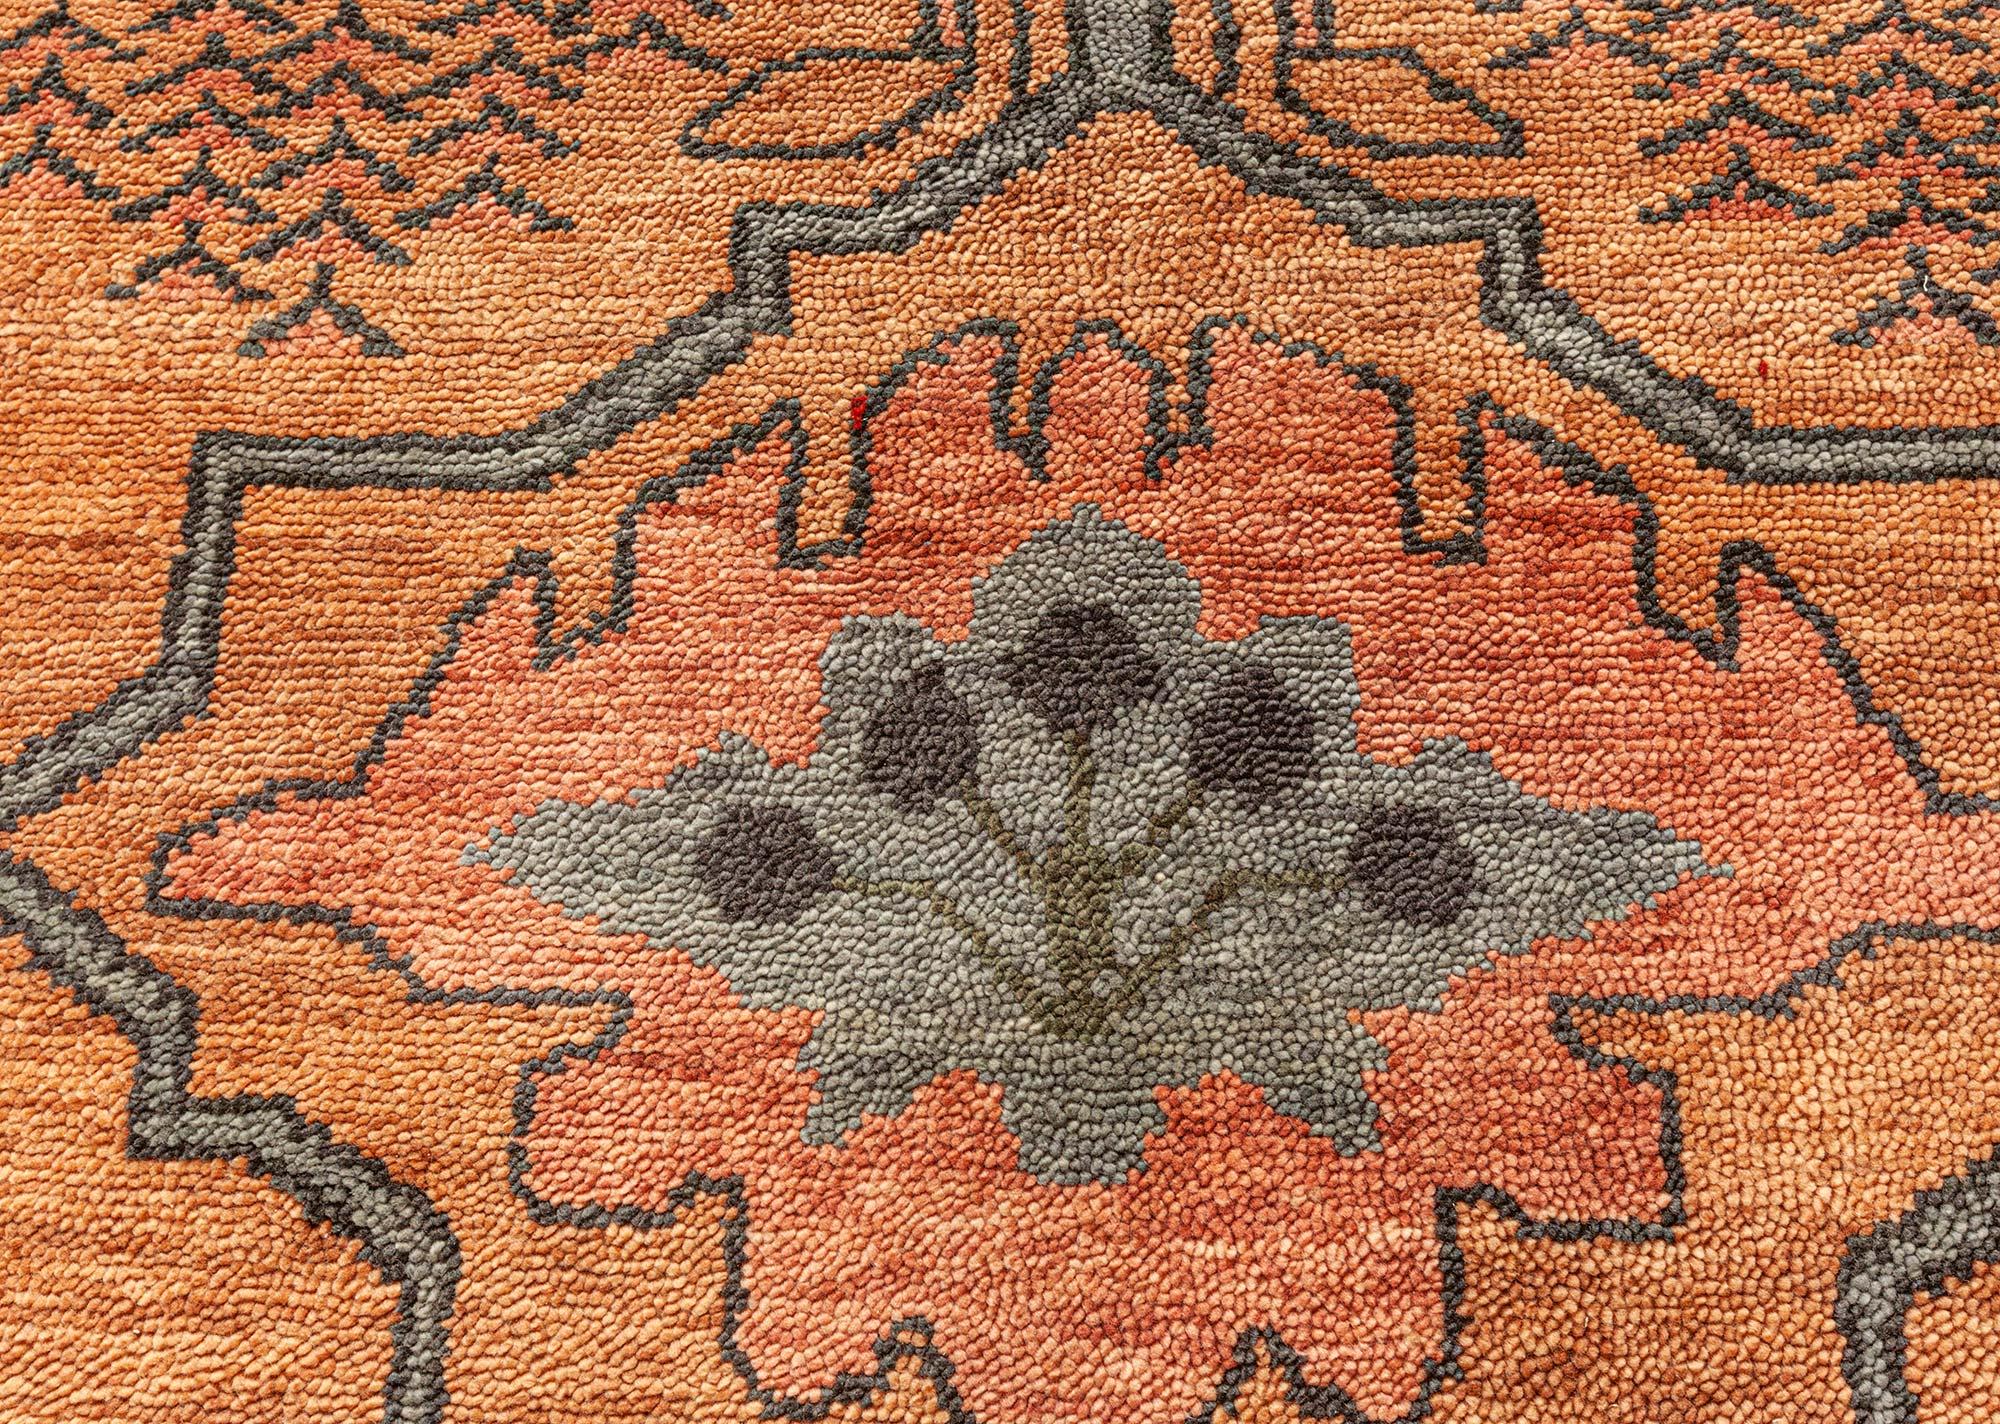 Hand-Knotted Arts & Crafts Style Rug by Doris Leslie Blau